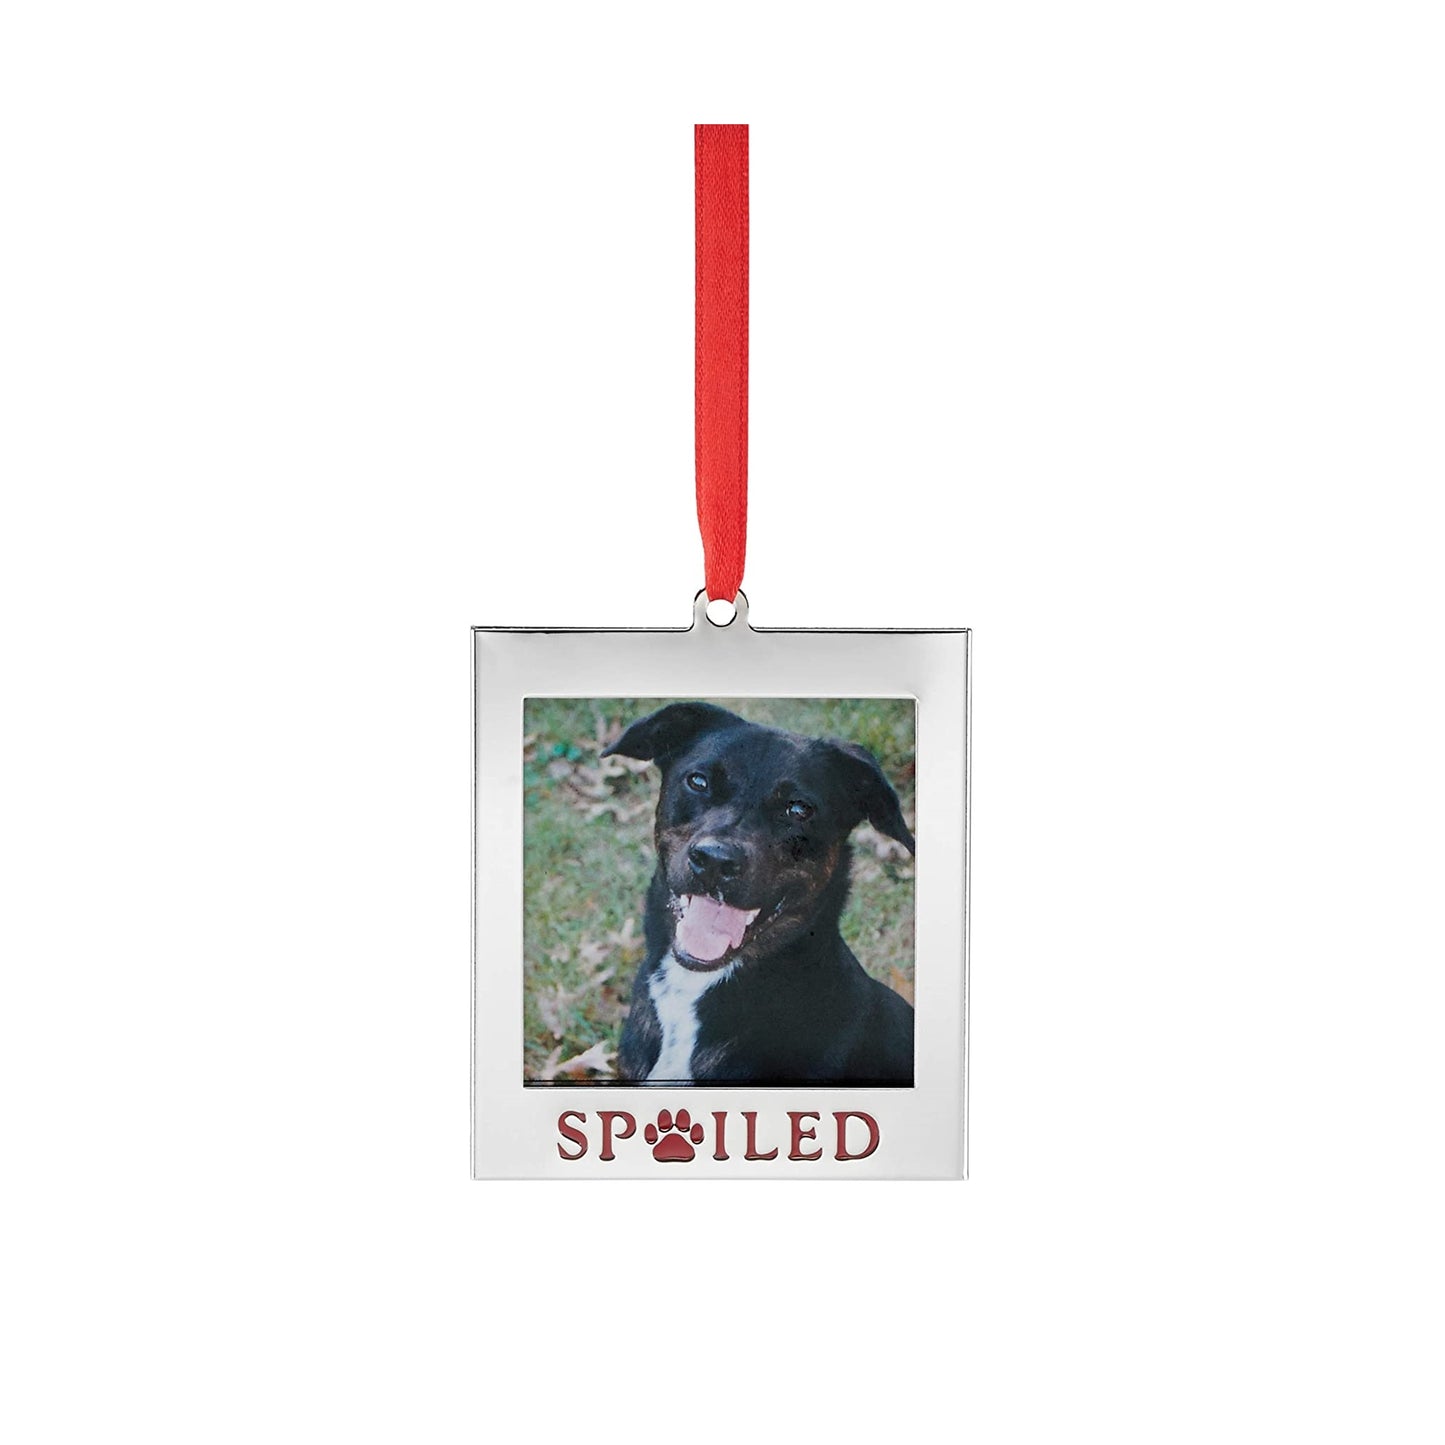 Silver Spoiled Pet Photo Frame Ornament by Lenox